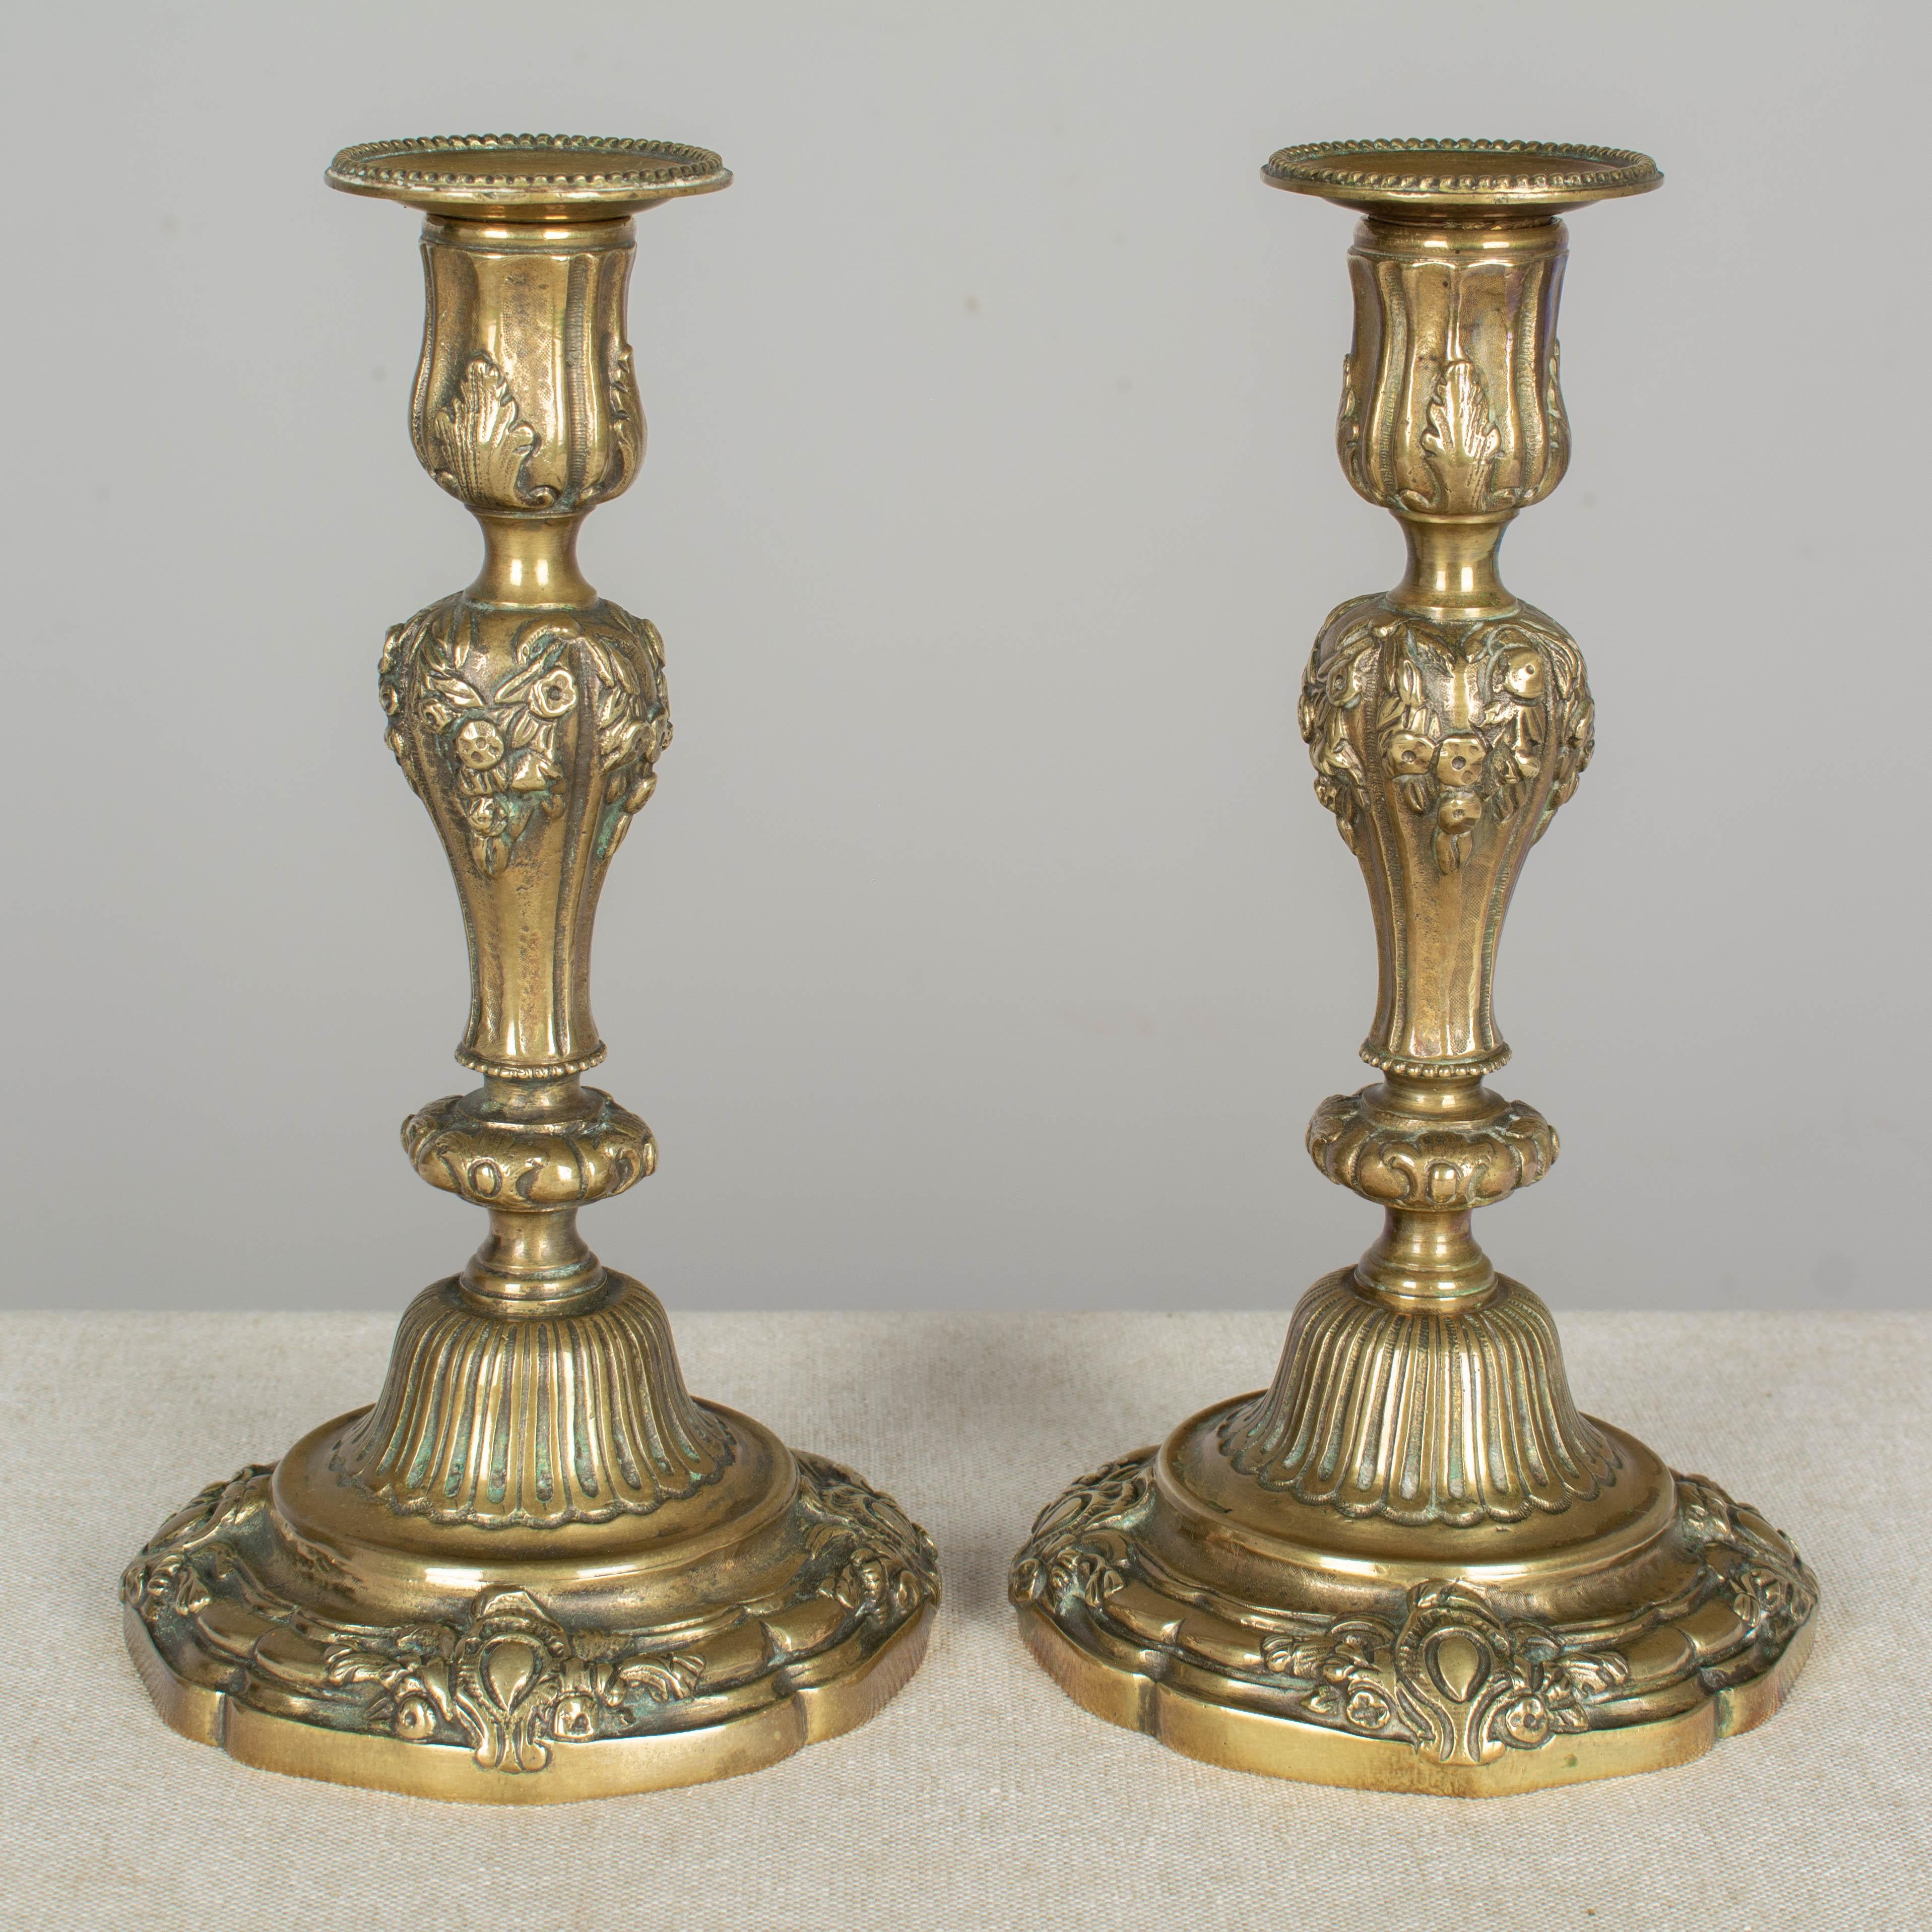 A pair of 19th century French Louis XV style cast bronze candlesticks. Good quality heavy casting with nice floral details.